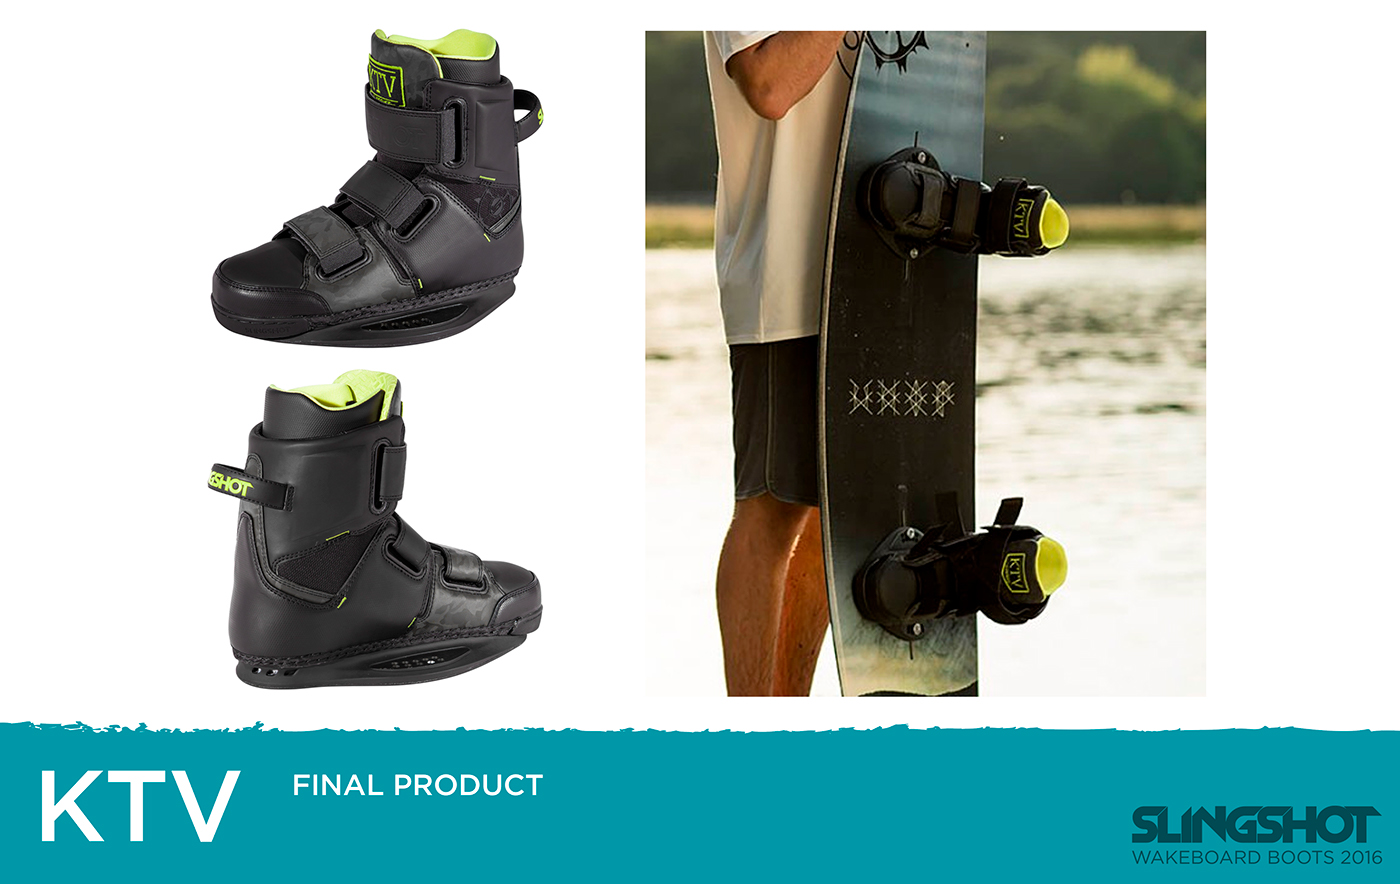  wakeboarding boots footwear footwear design action sports wake Water Sports industrial design  product design 